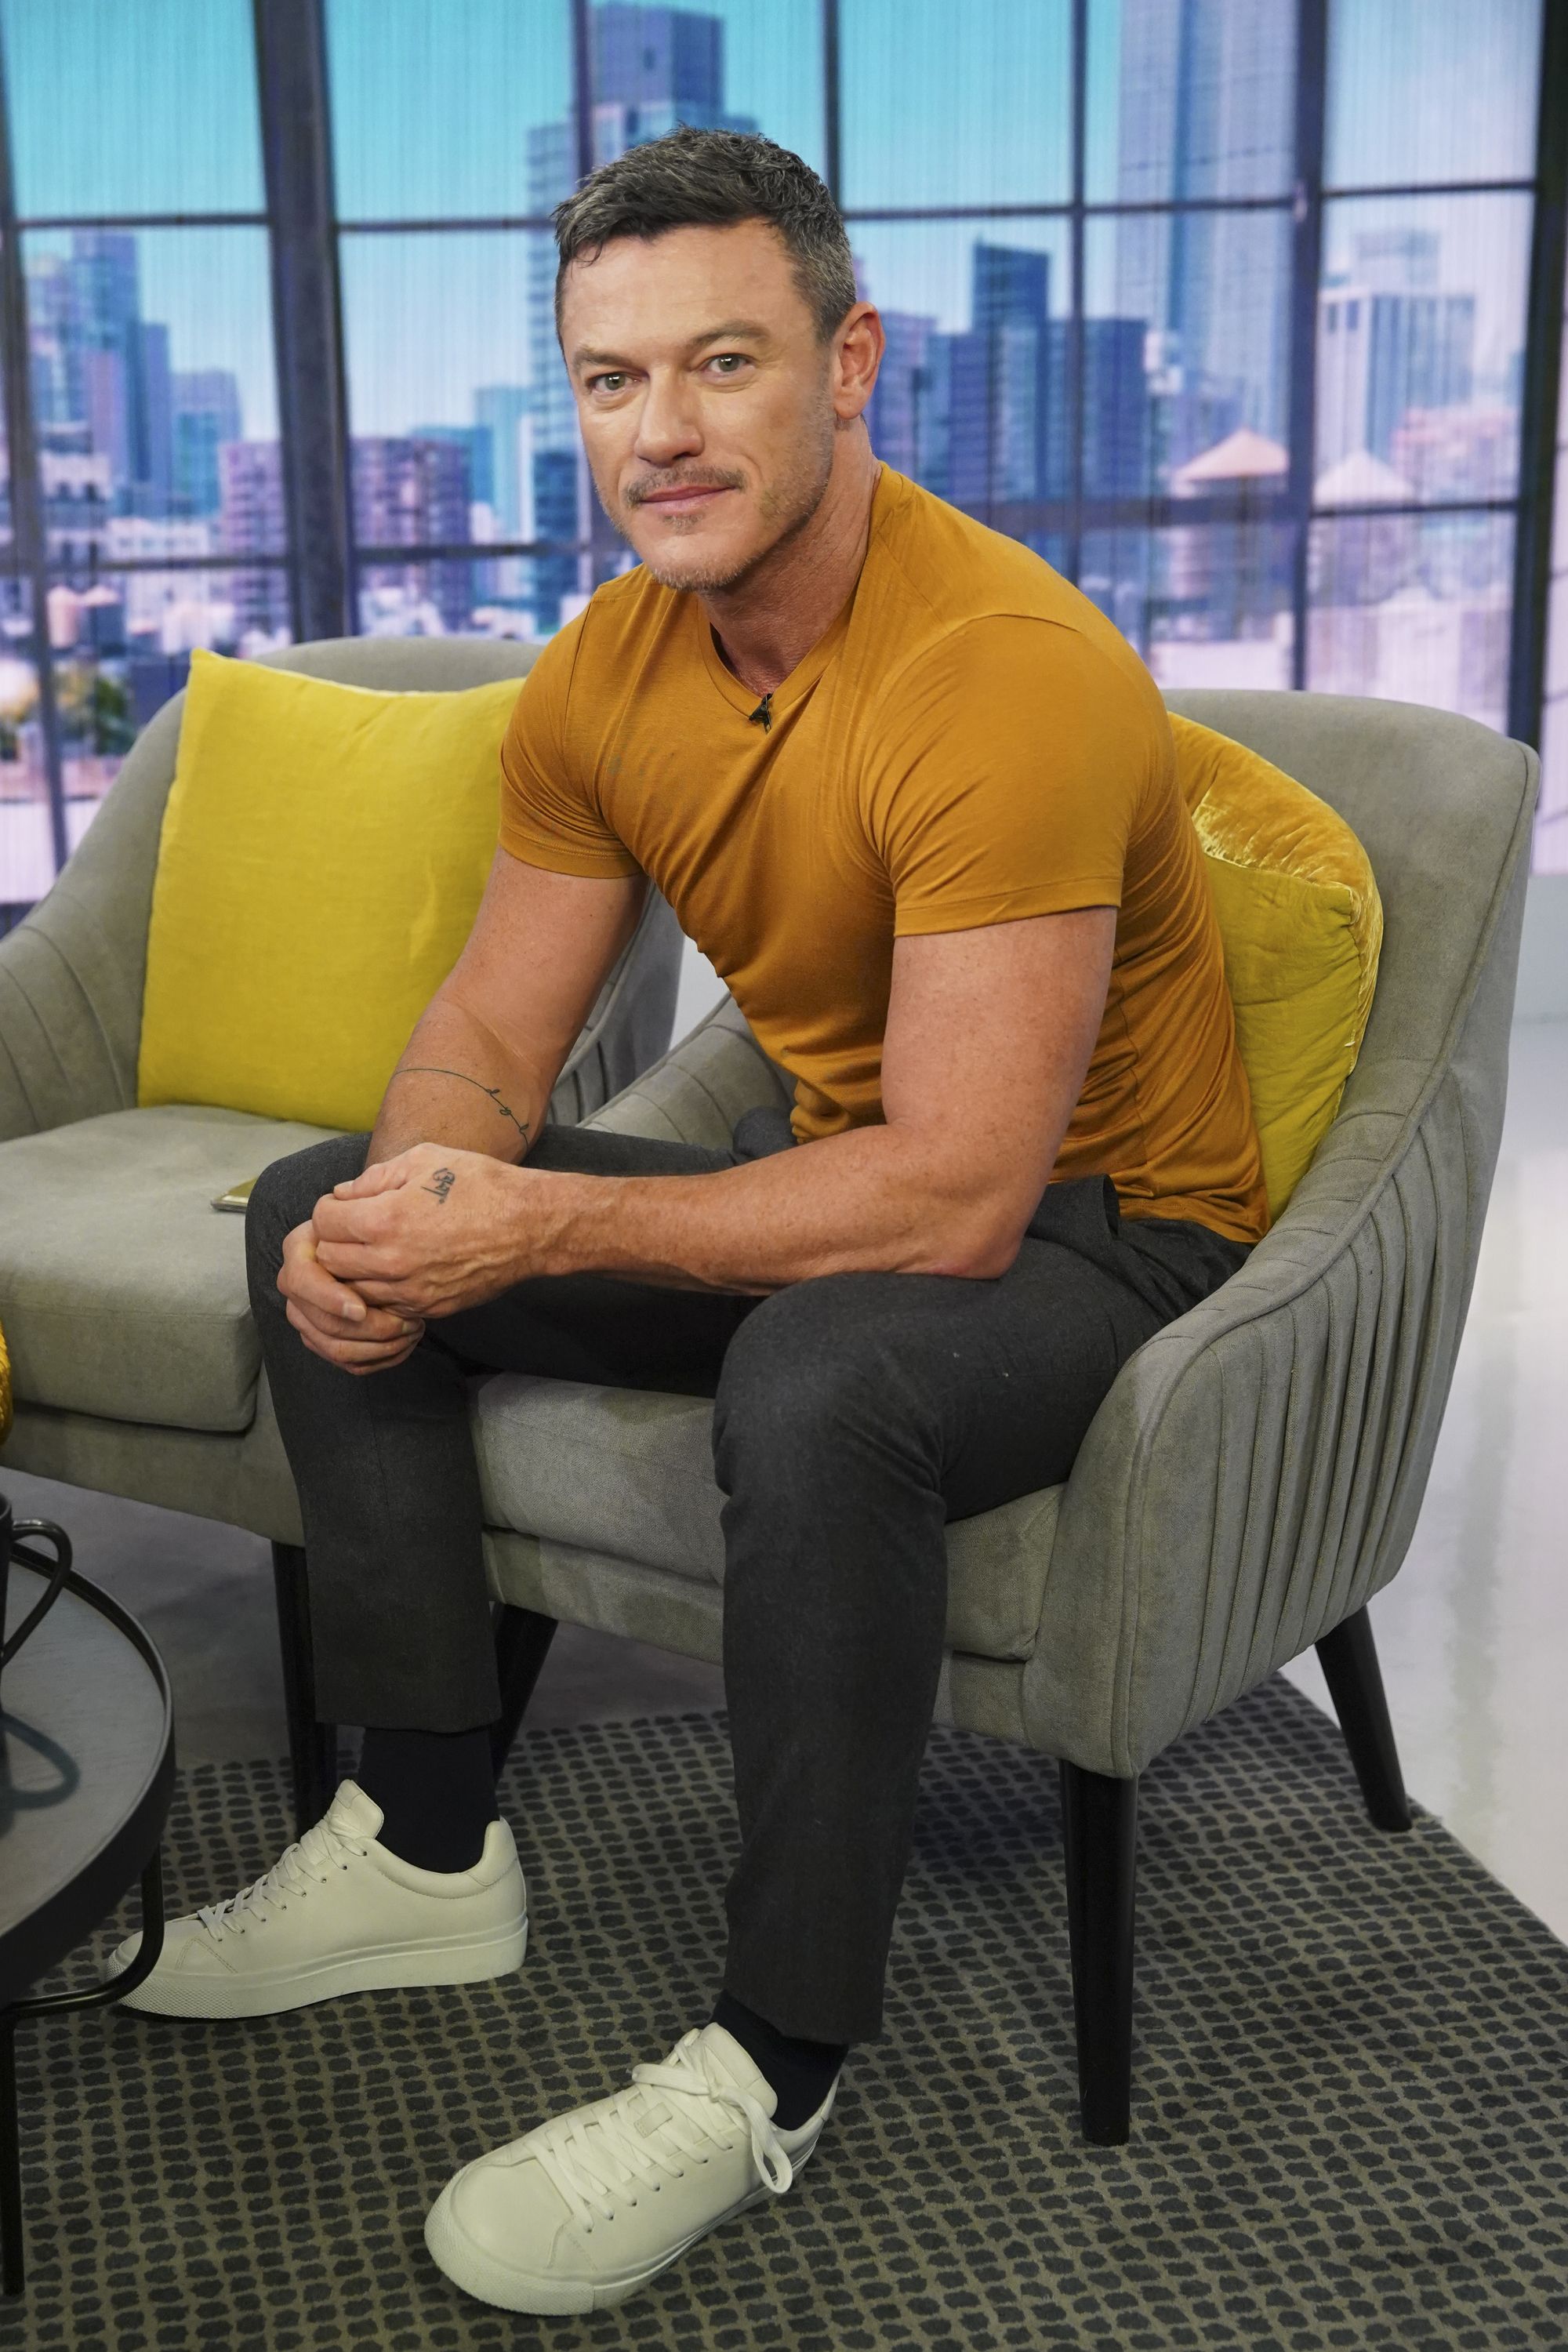 pop of the morning    episode 200110    pictured luke evans promoting his debut album at last on january 10, 2020    photo by rob kime entertainmentnbcu photo bank via getty images